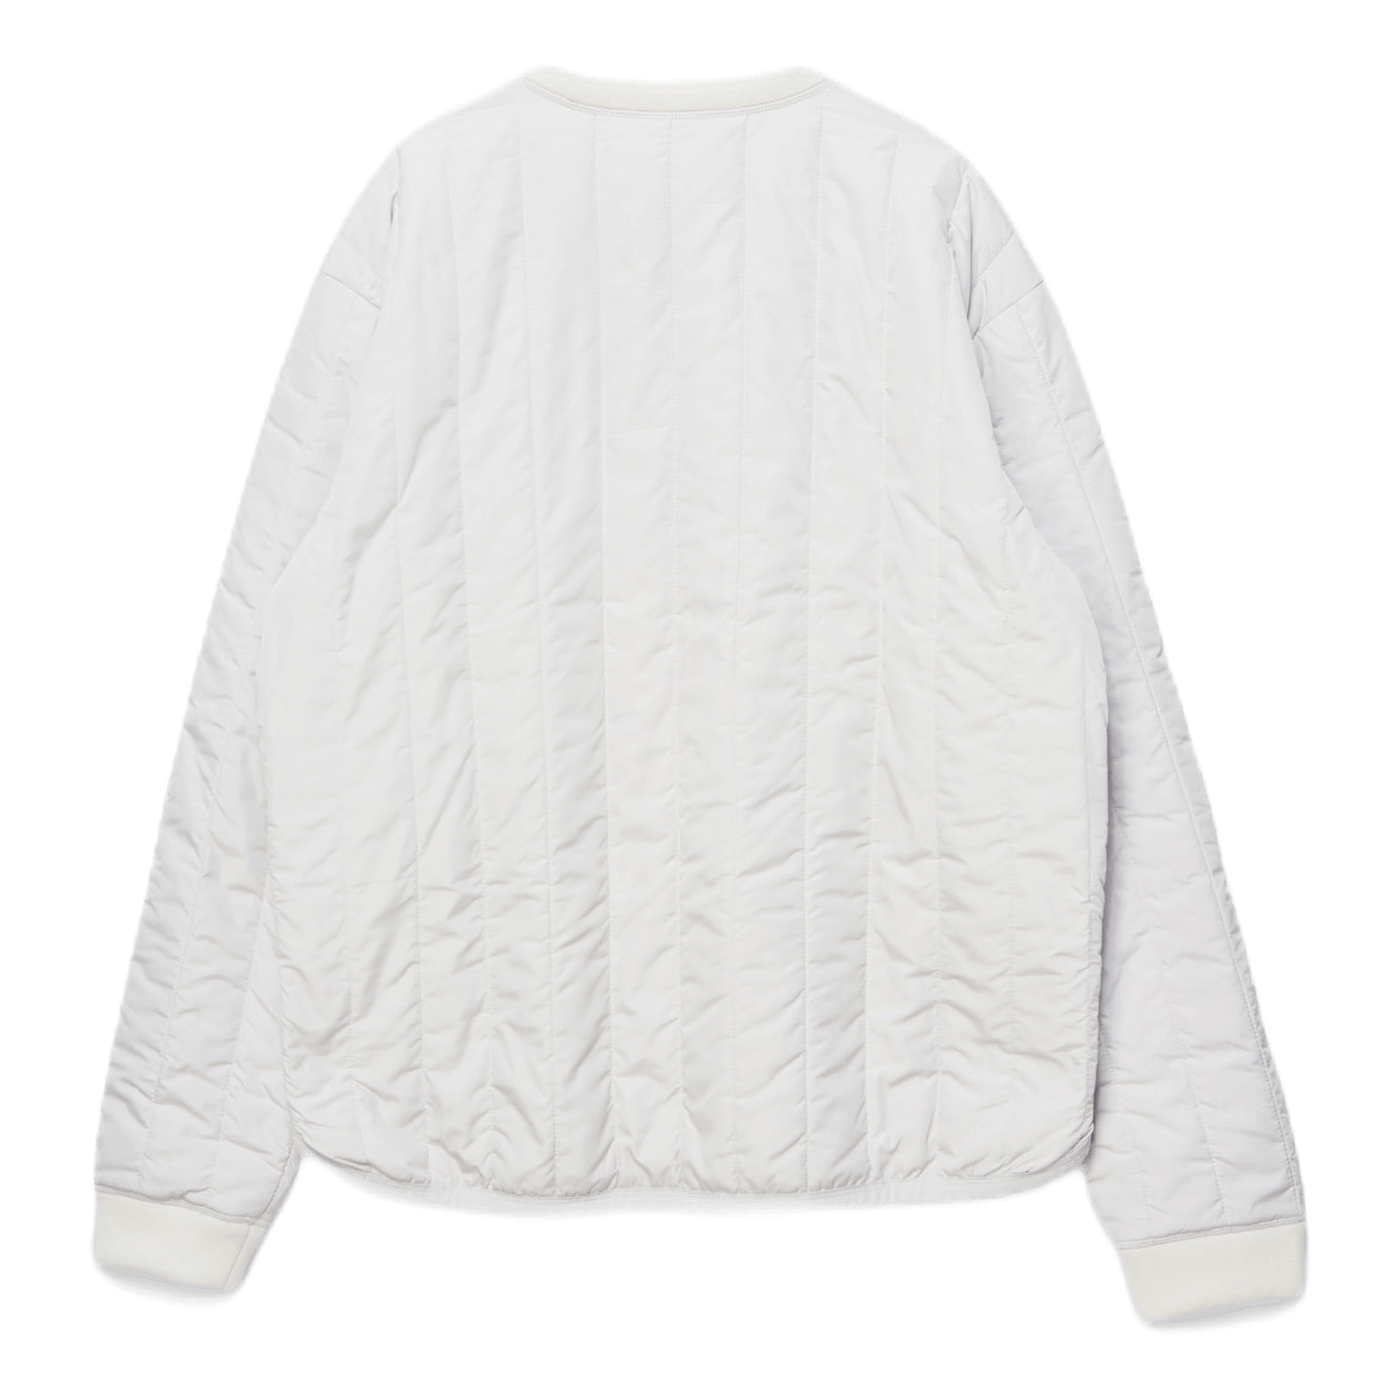 Heritage Hh Arc Padded Sweater White